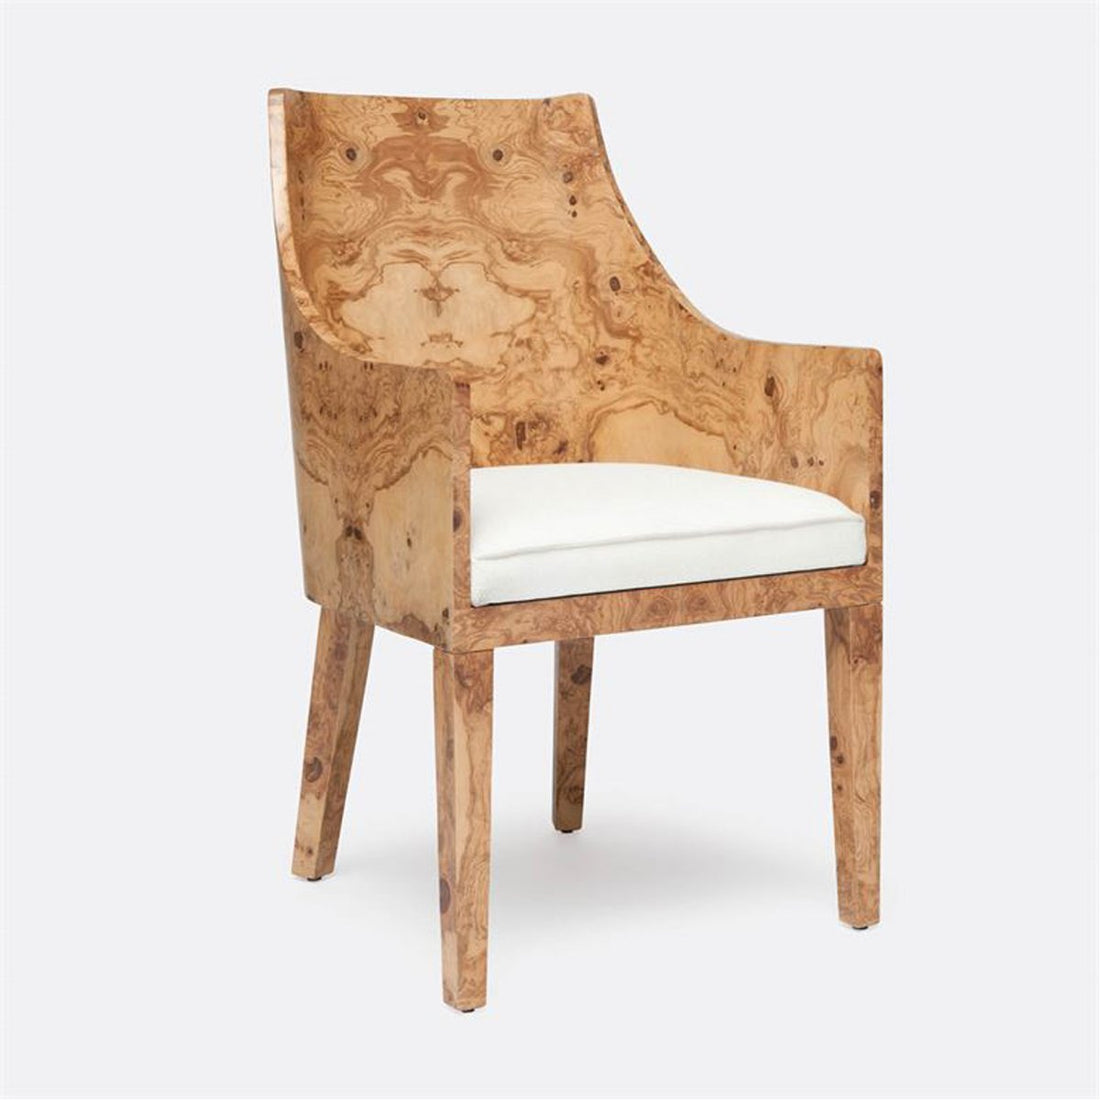 Made Goods Everett Olive Ash Veneer Arm Chair in Colorado Leather